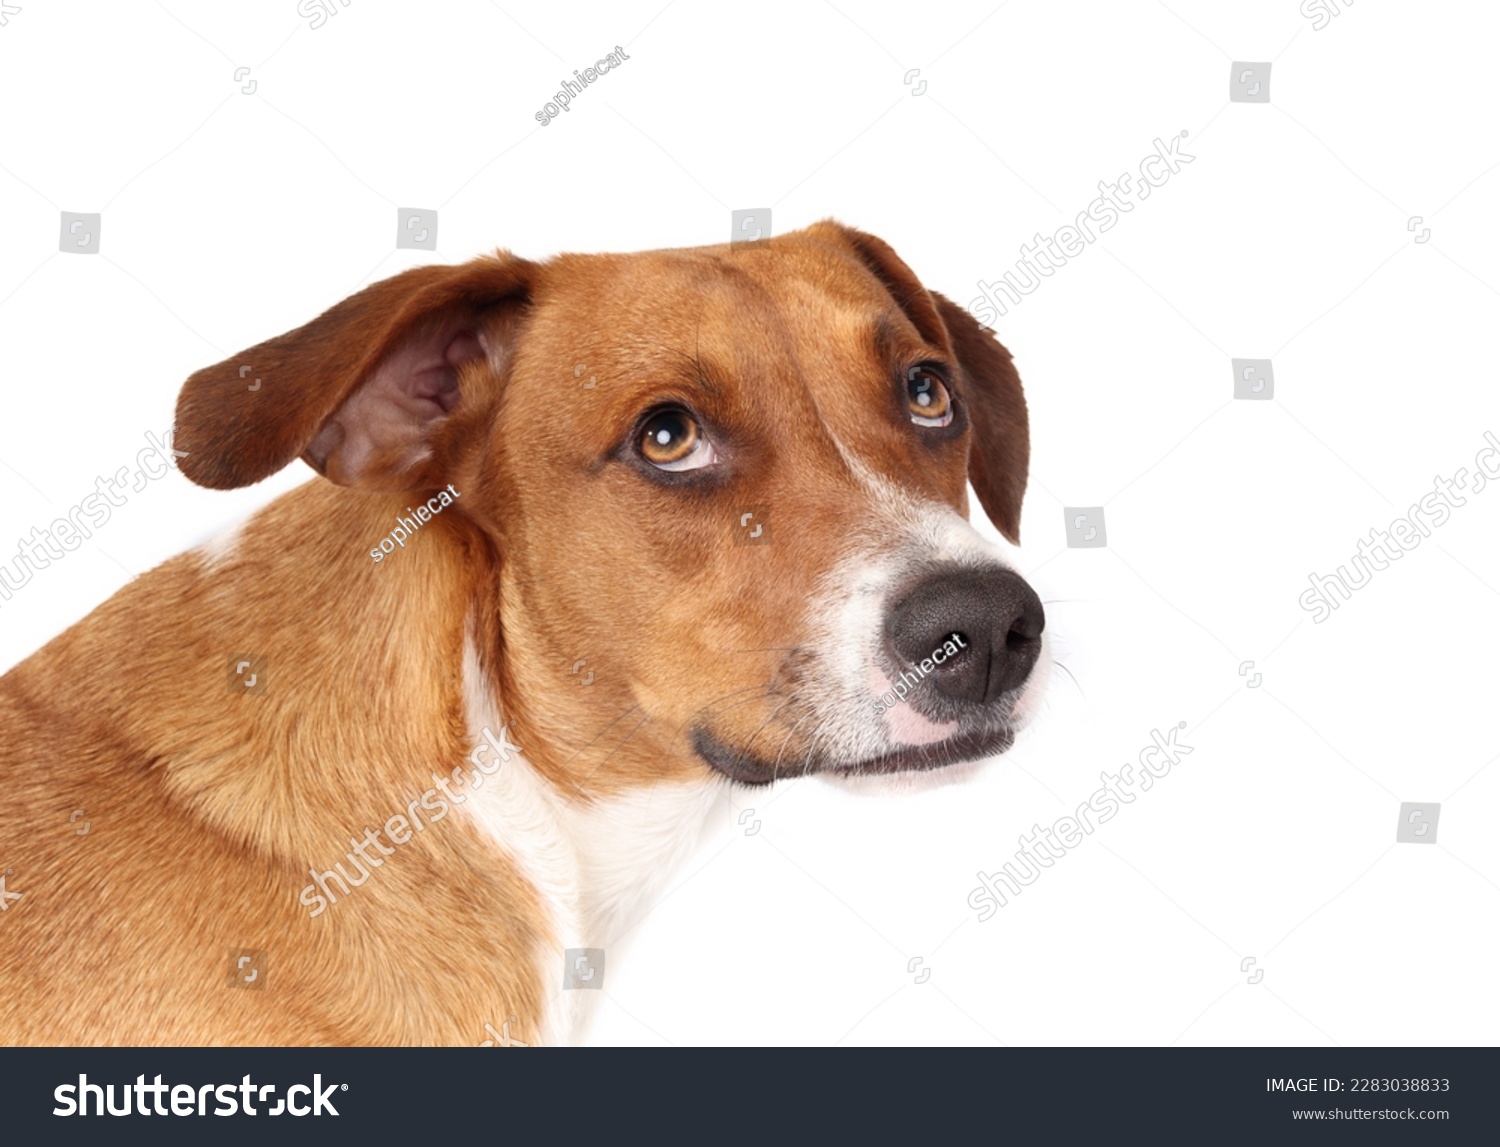 Shy dog looking up at camera with head tilted. Isolated puppy dog with timid, scared or afraid body language. 1 year old harrier mix dog, brown white short hair. Selective focus. White background. #2283038833